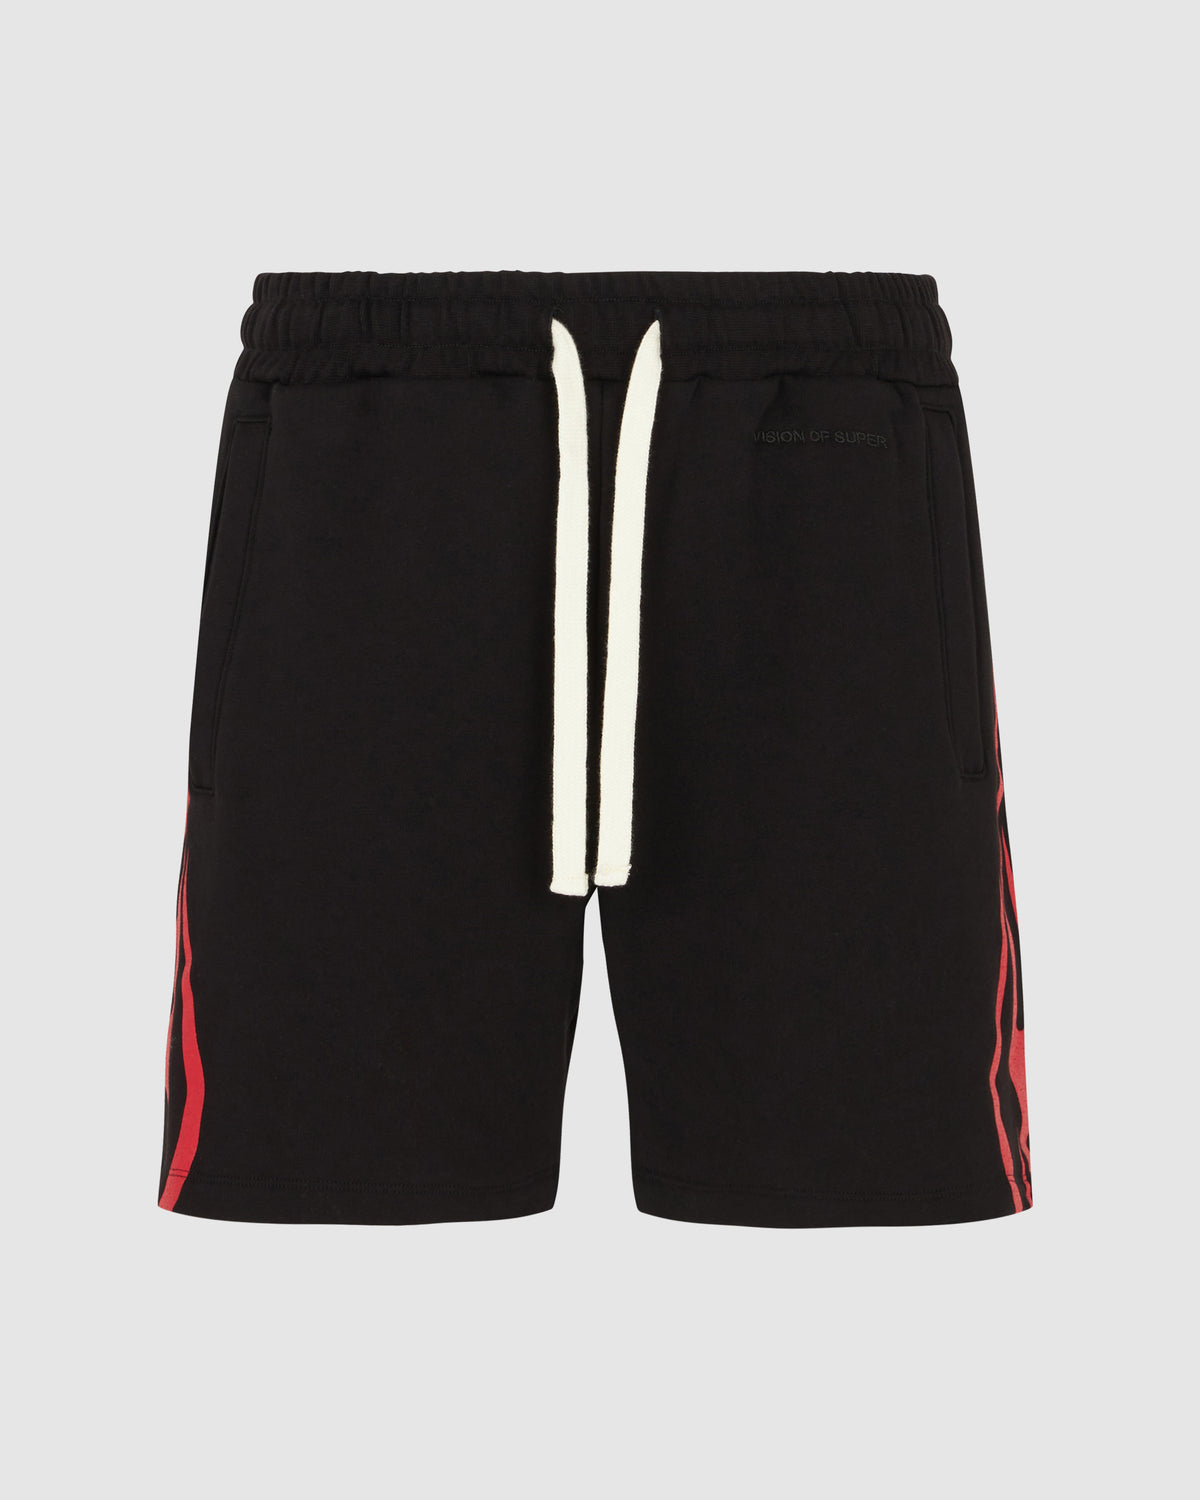 VISION OF SUPER BLACK SHORTS WITH RED TRIBAL FLAMES